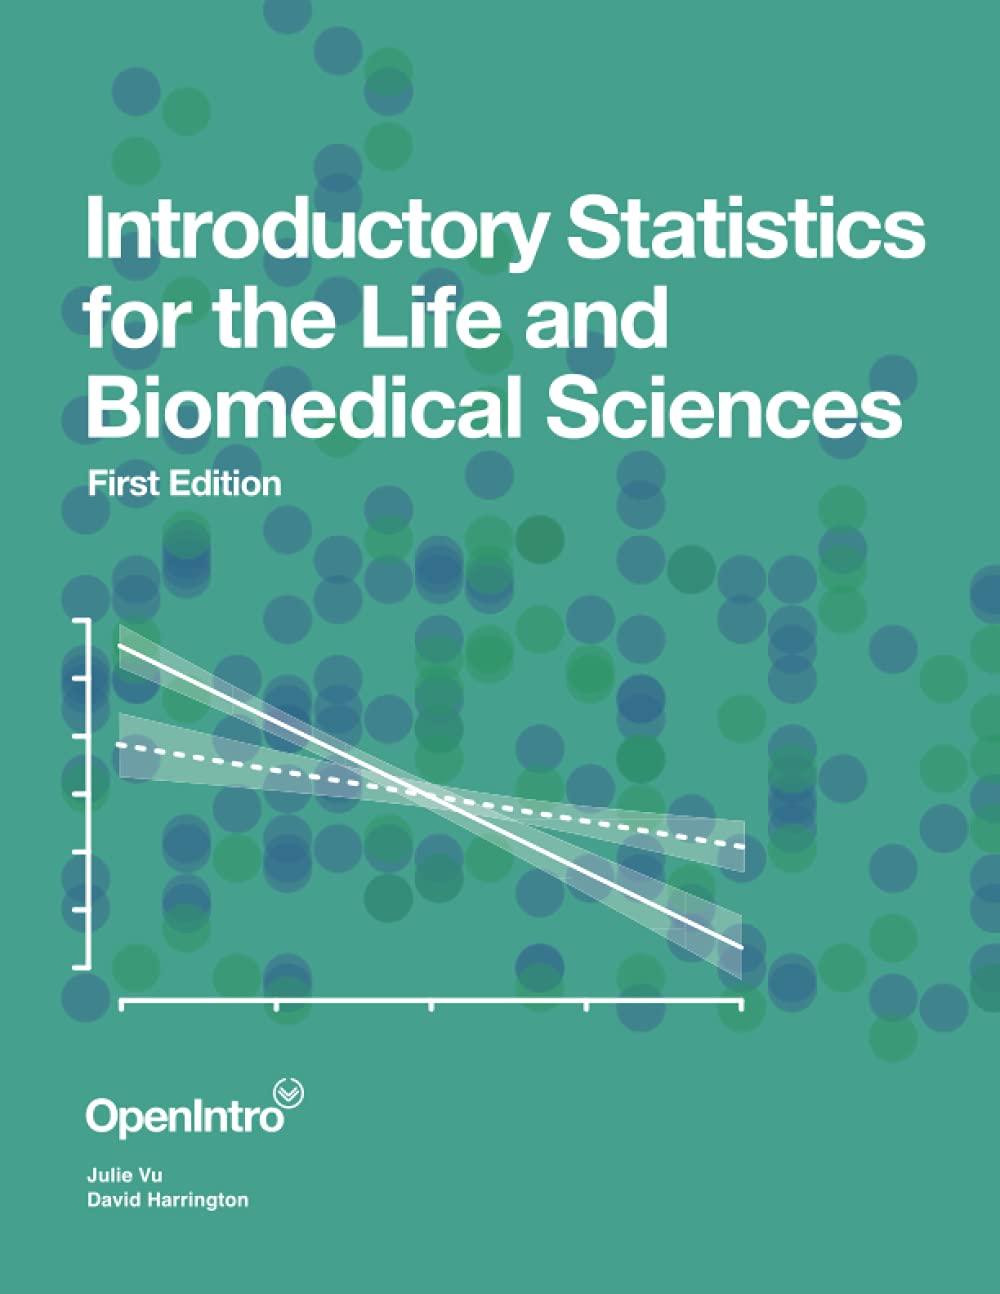 introductory statistics for the life and biomedical sciences 1st edition julie vu, david harrington